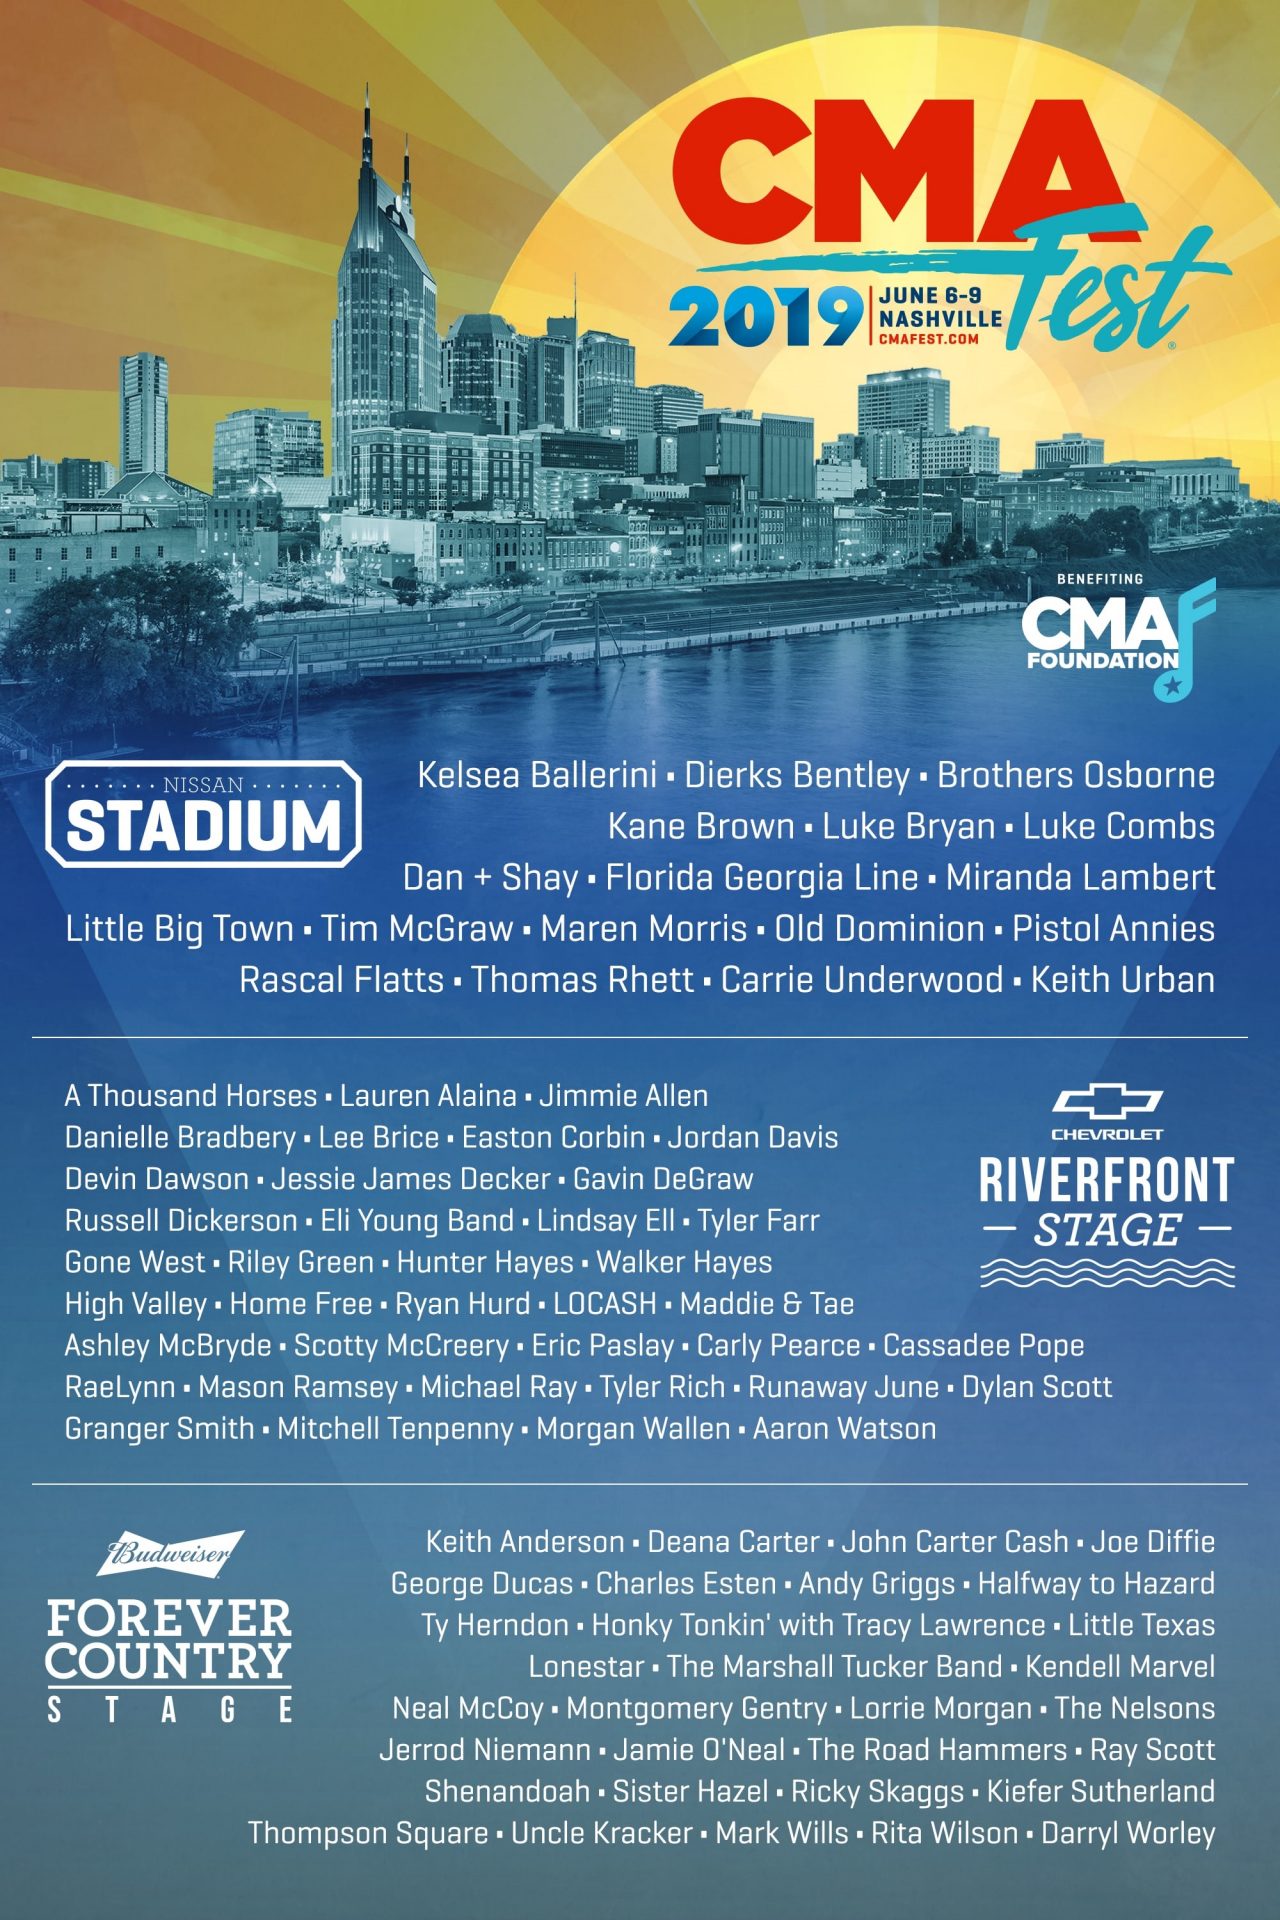 Luke Bryan, Carrie Underwood, Keith Urban and More Lead 2019 CMA Fest